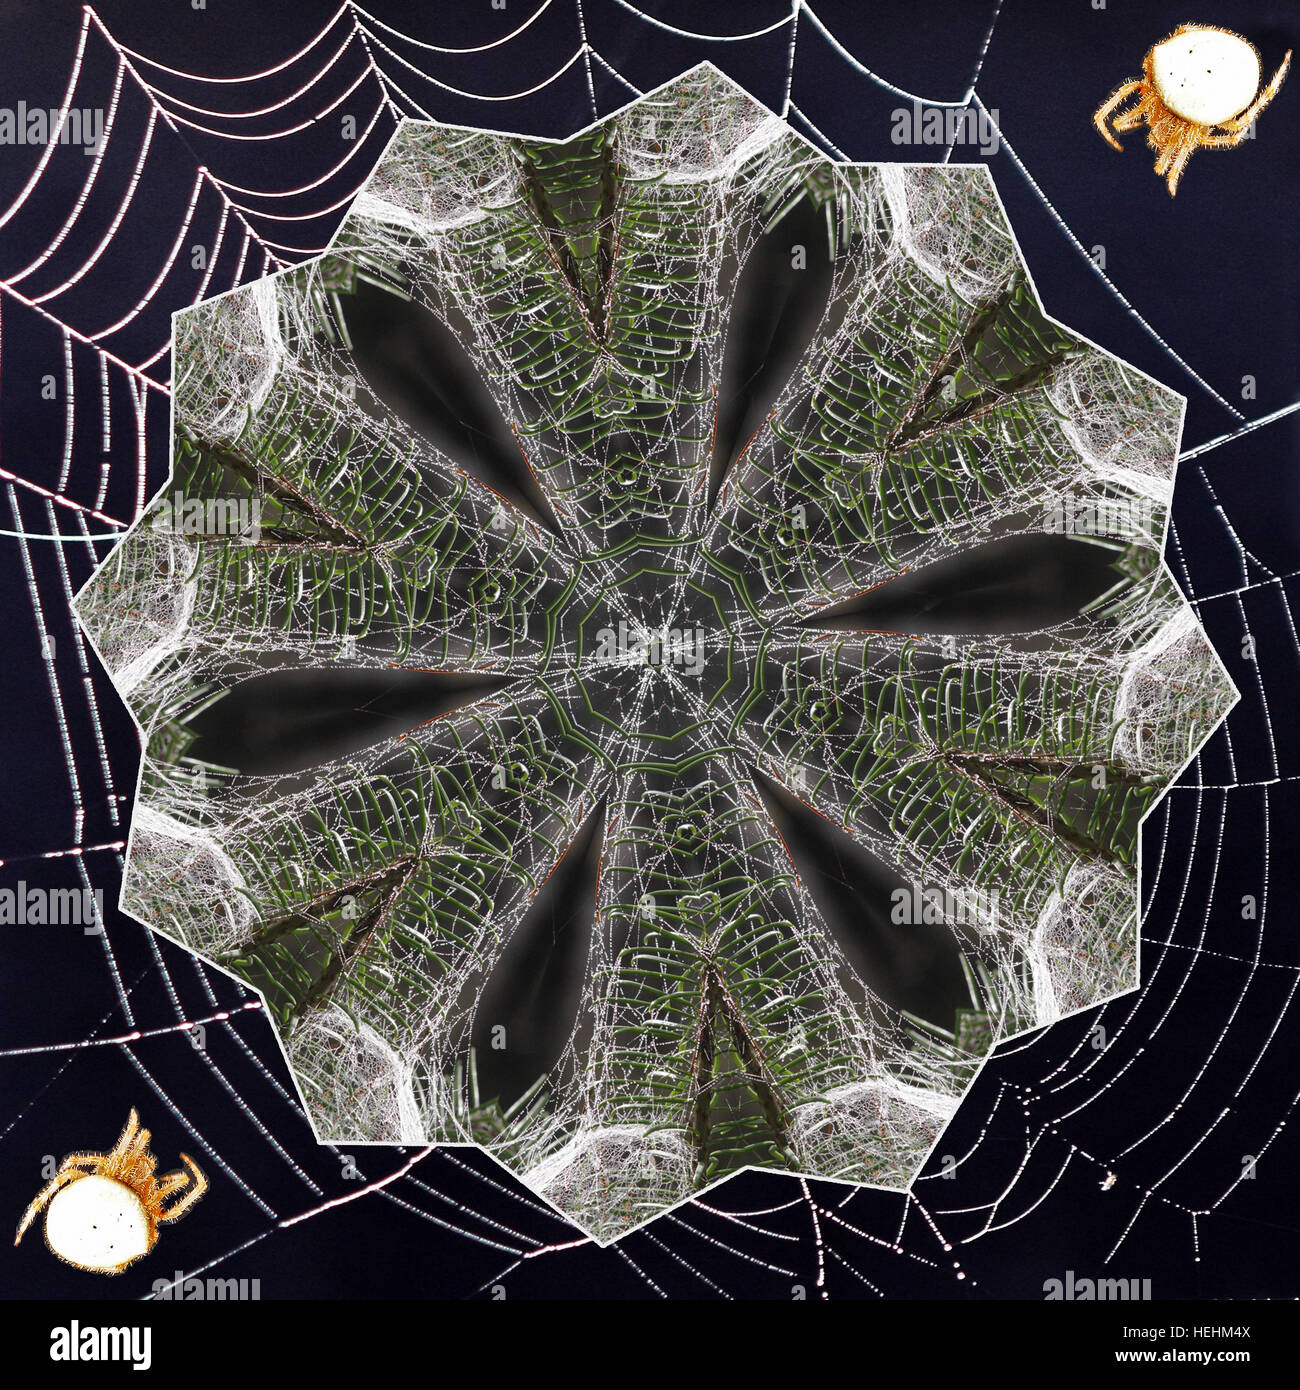 Kaleidoscope made from spider webs Stock Photo